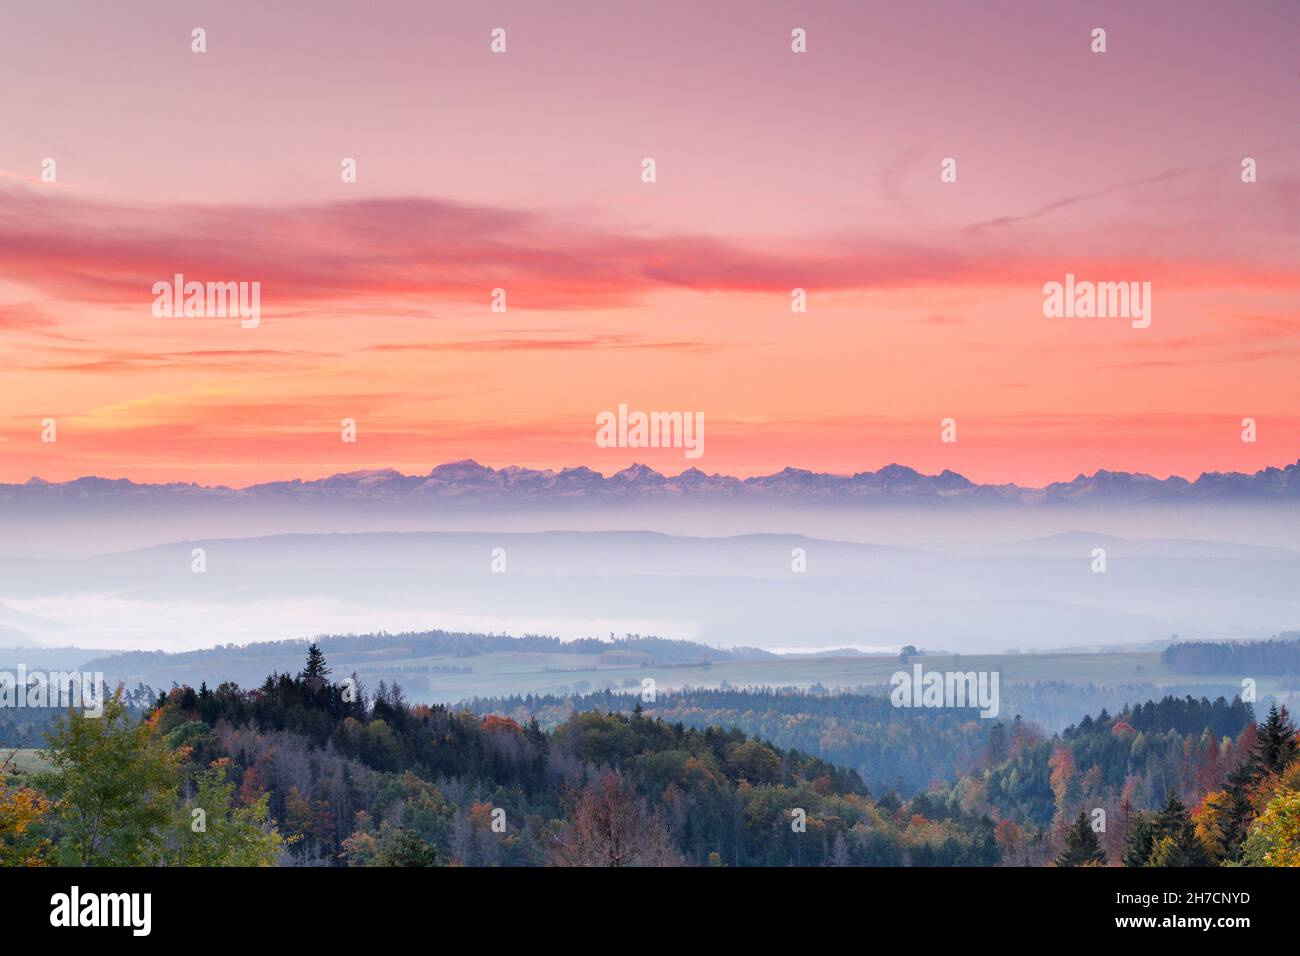 Sunrise with mist in autumn over hilly landscape, Swiss Alps in the background, view from Hoechenschwand in the Black Forest, Germany Stock Photo